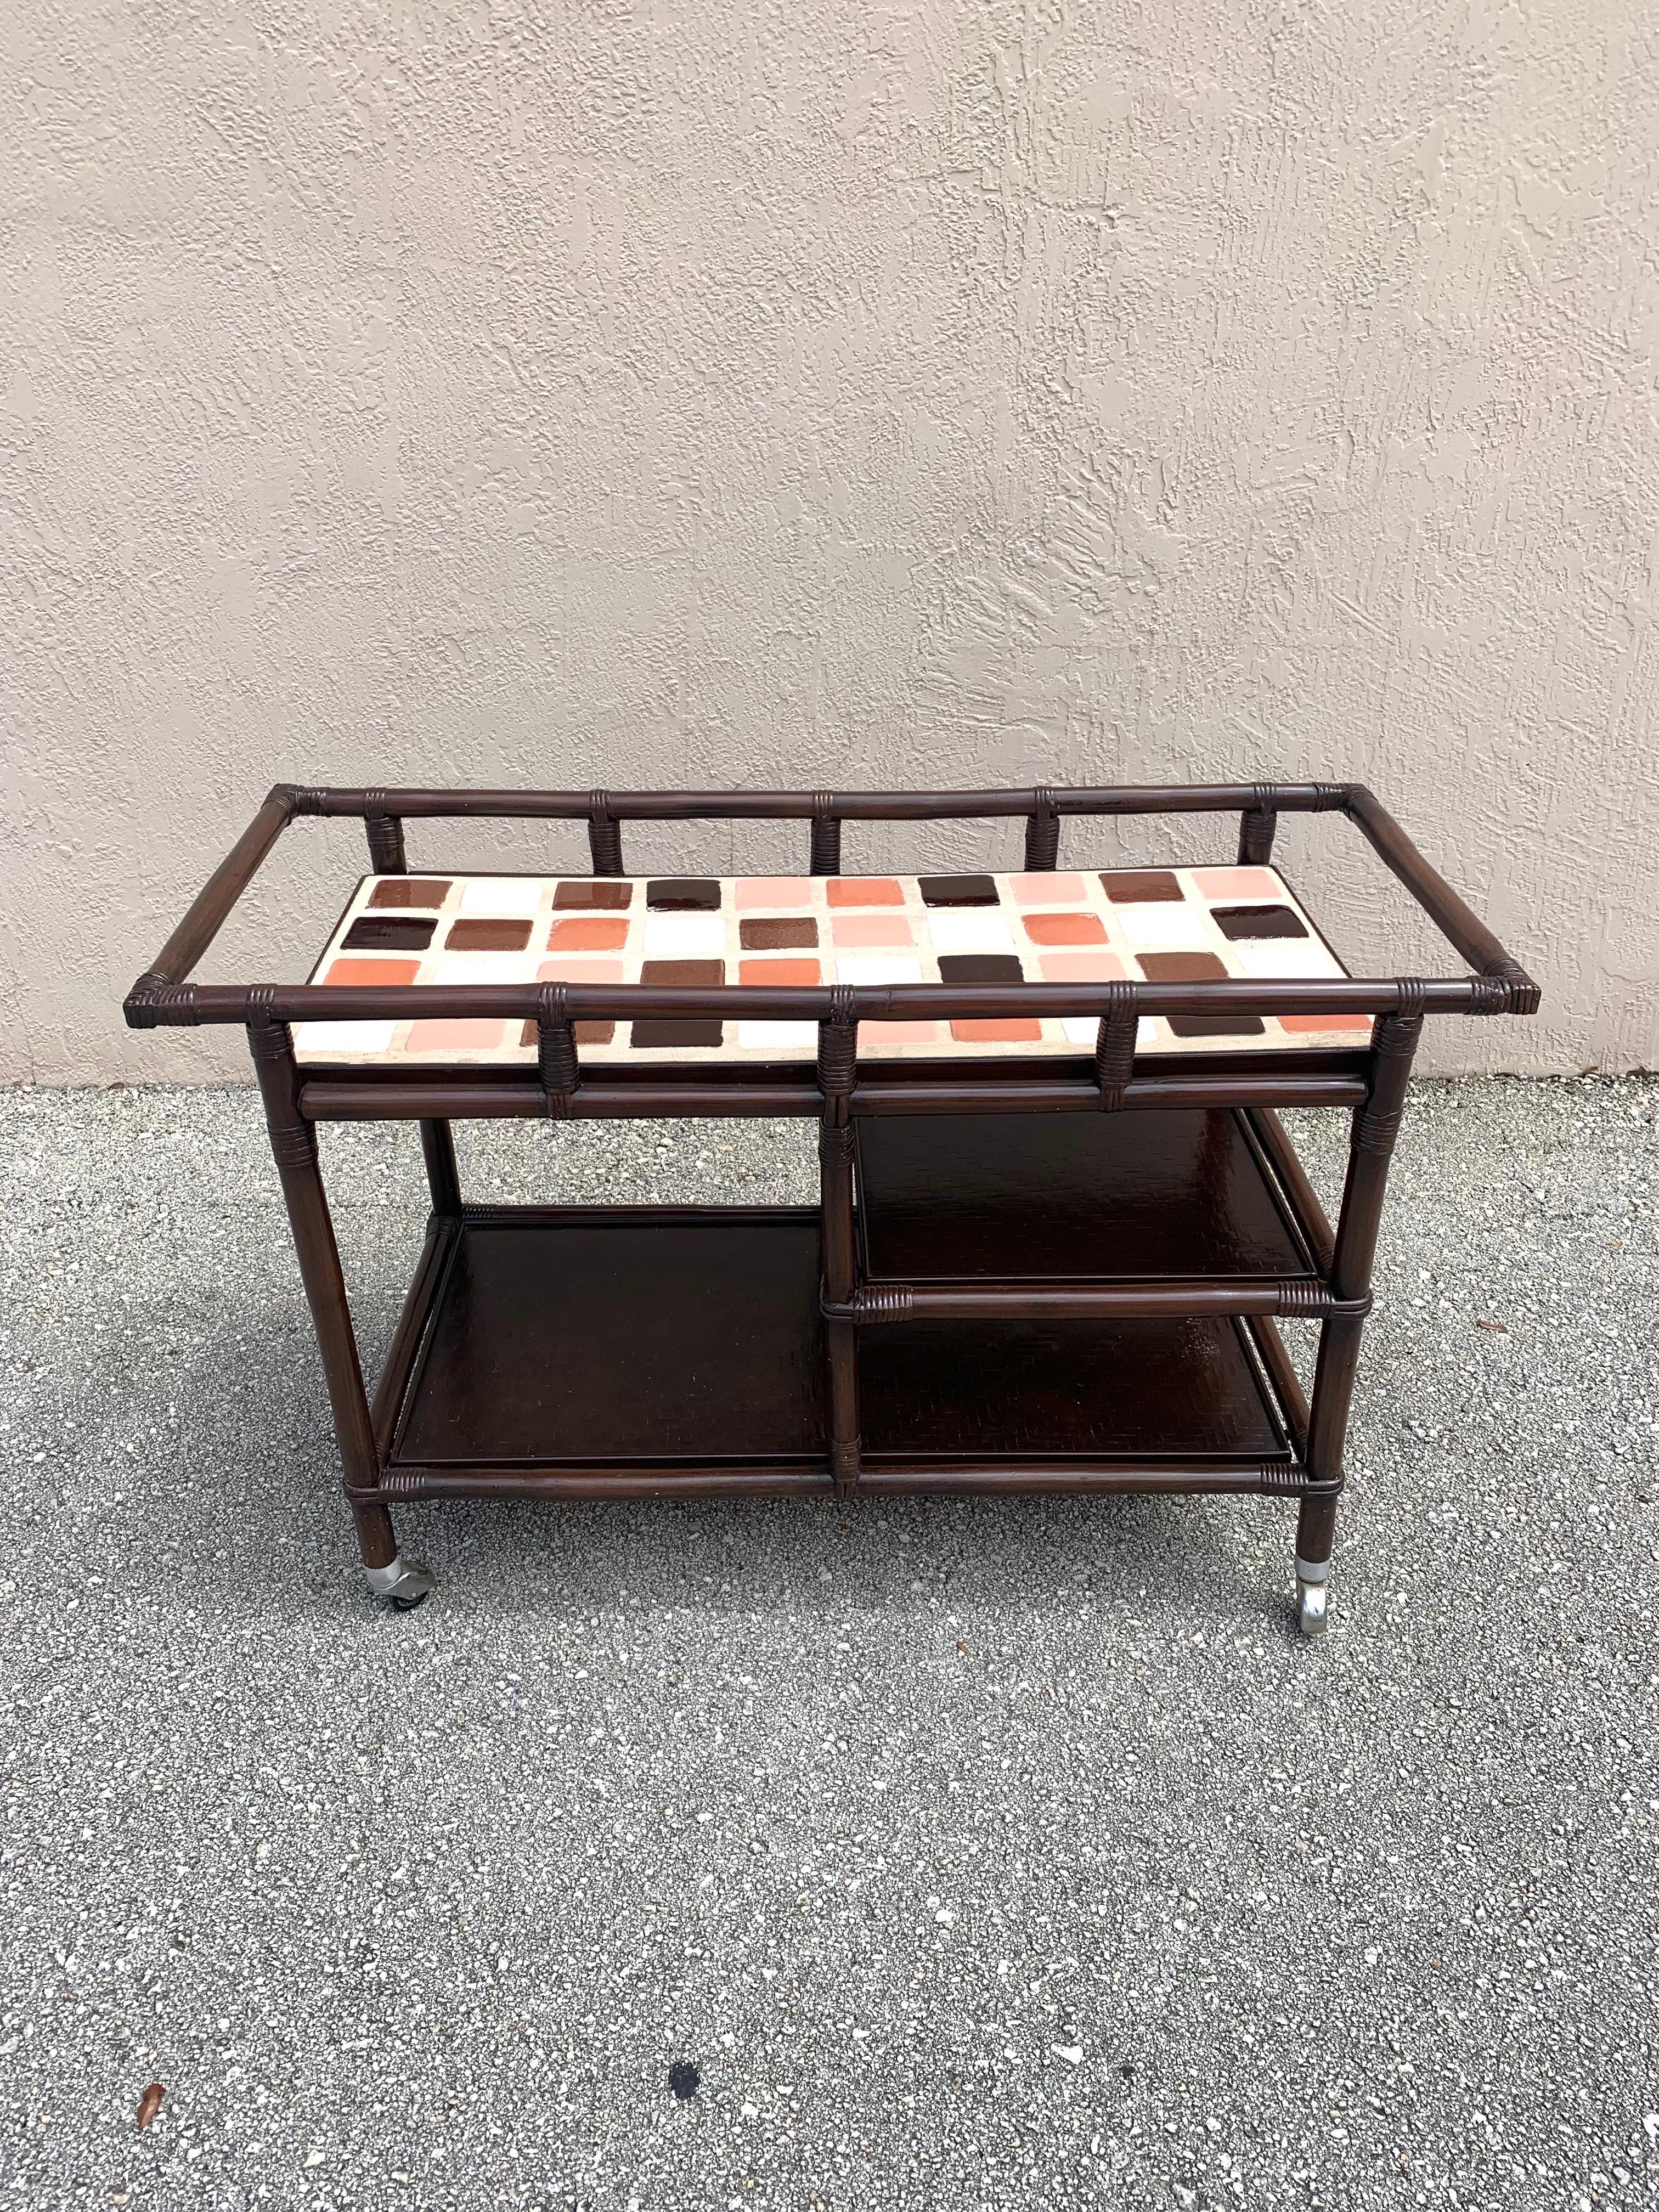 Rattan bar cart designed by John Wisner. Manufactured by Ficks Reed. Made of wood, cane and rattan. With a brown lacquer finish and a tile top of beautiful earth tones. Lattice bamboo work on the top of the shelves underneath. Circa 1950s. 

